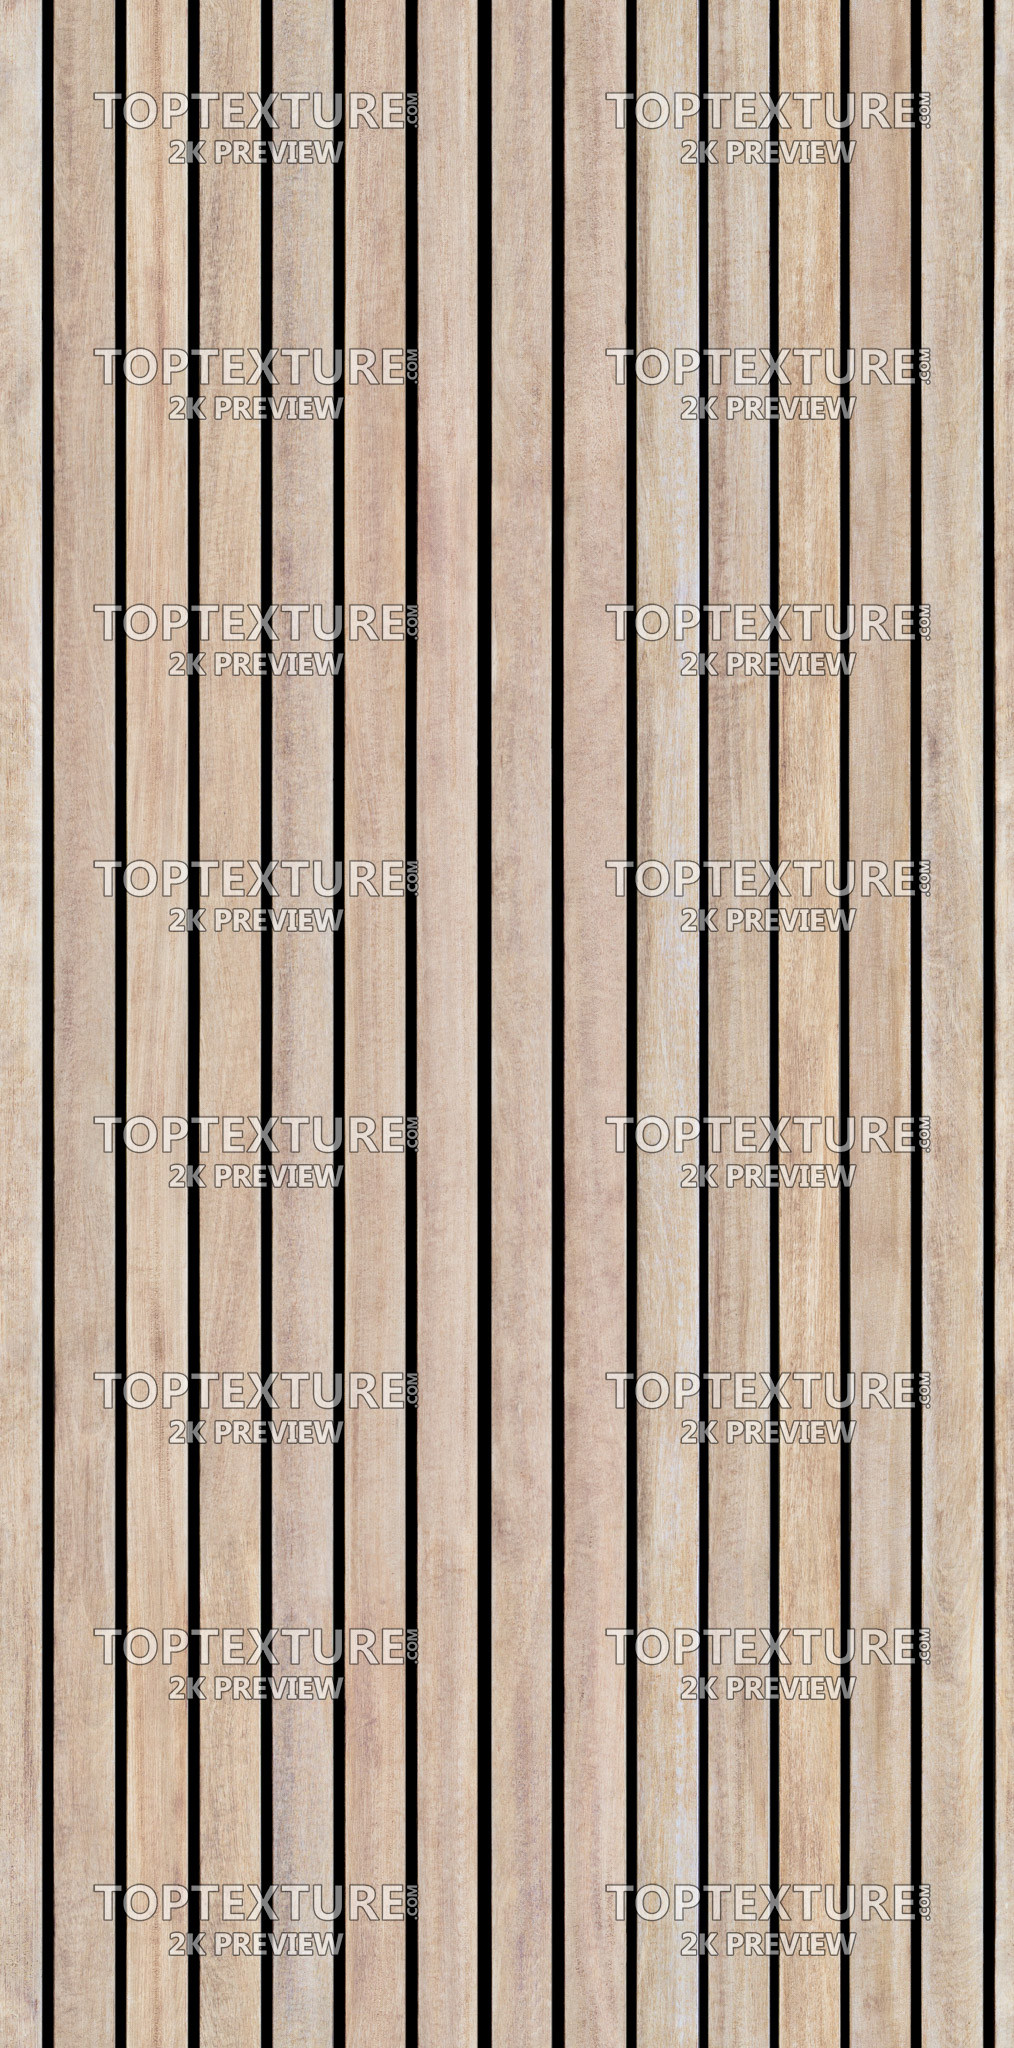 Clean Wood Planks with Wide Gaps - 2K preview